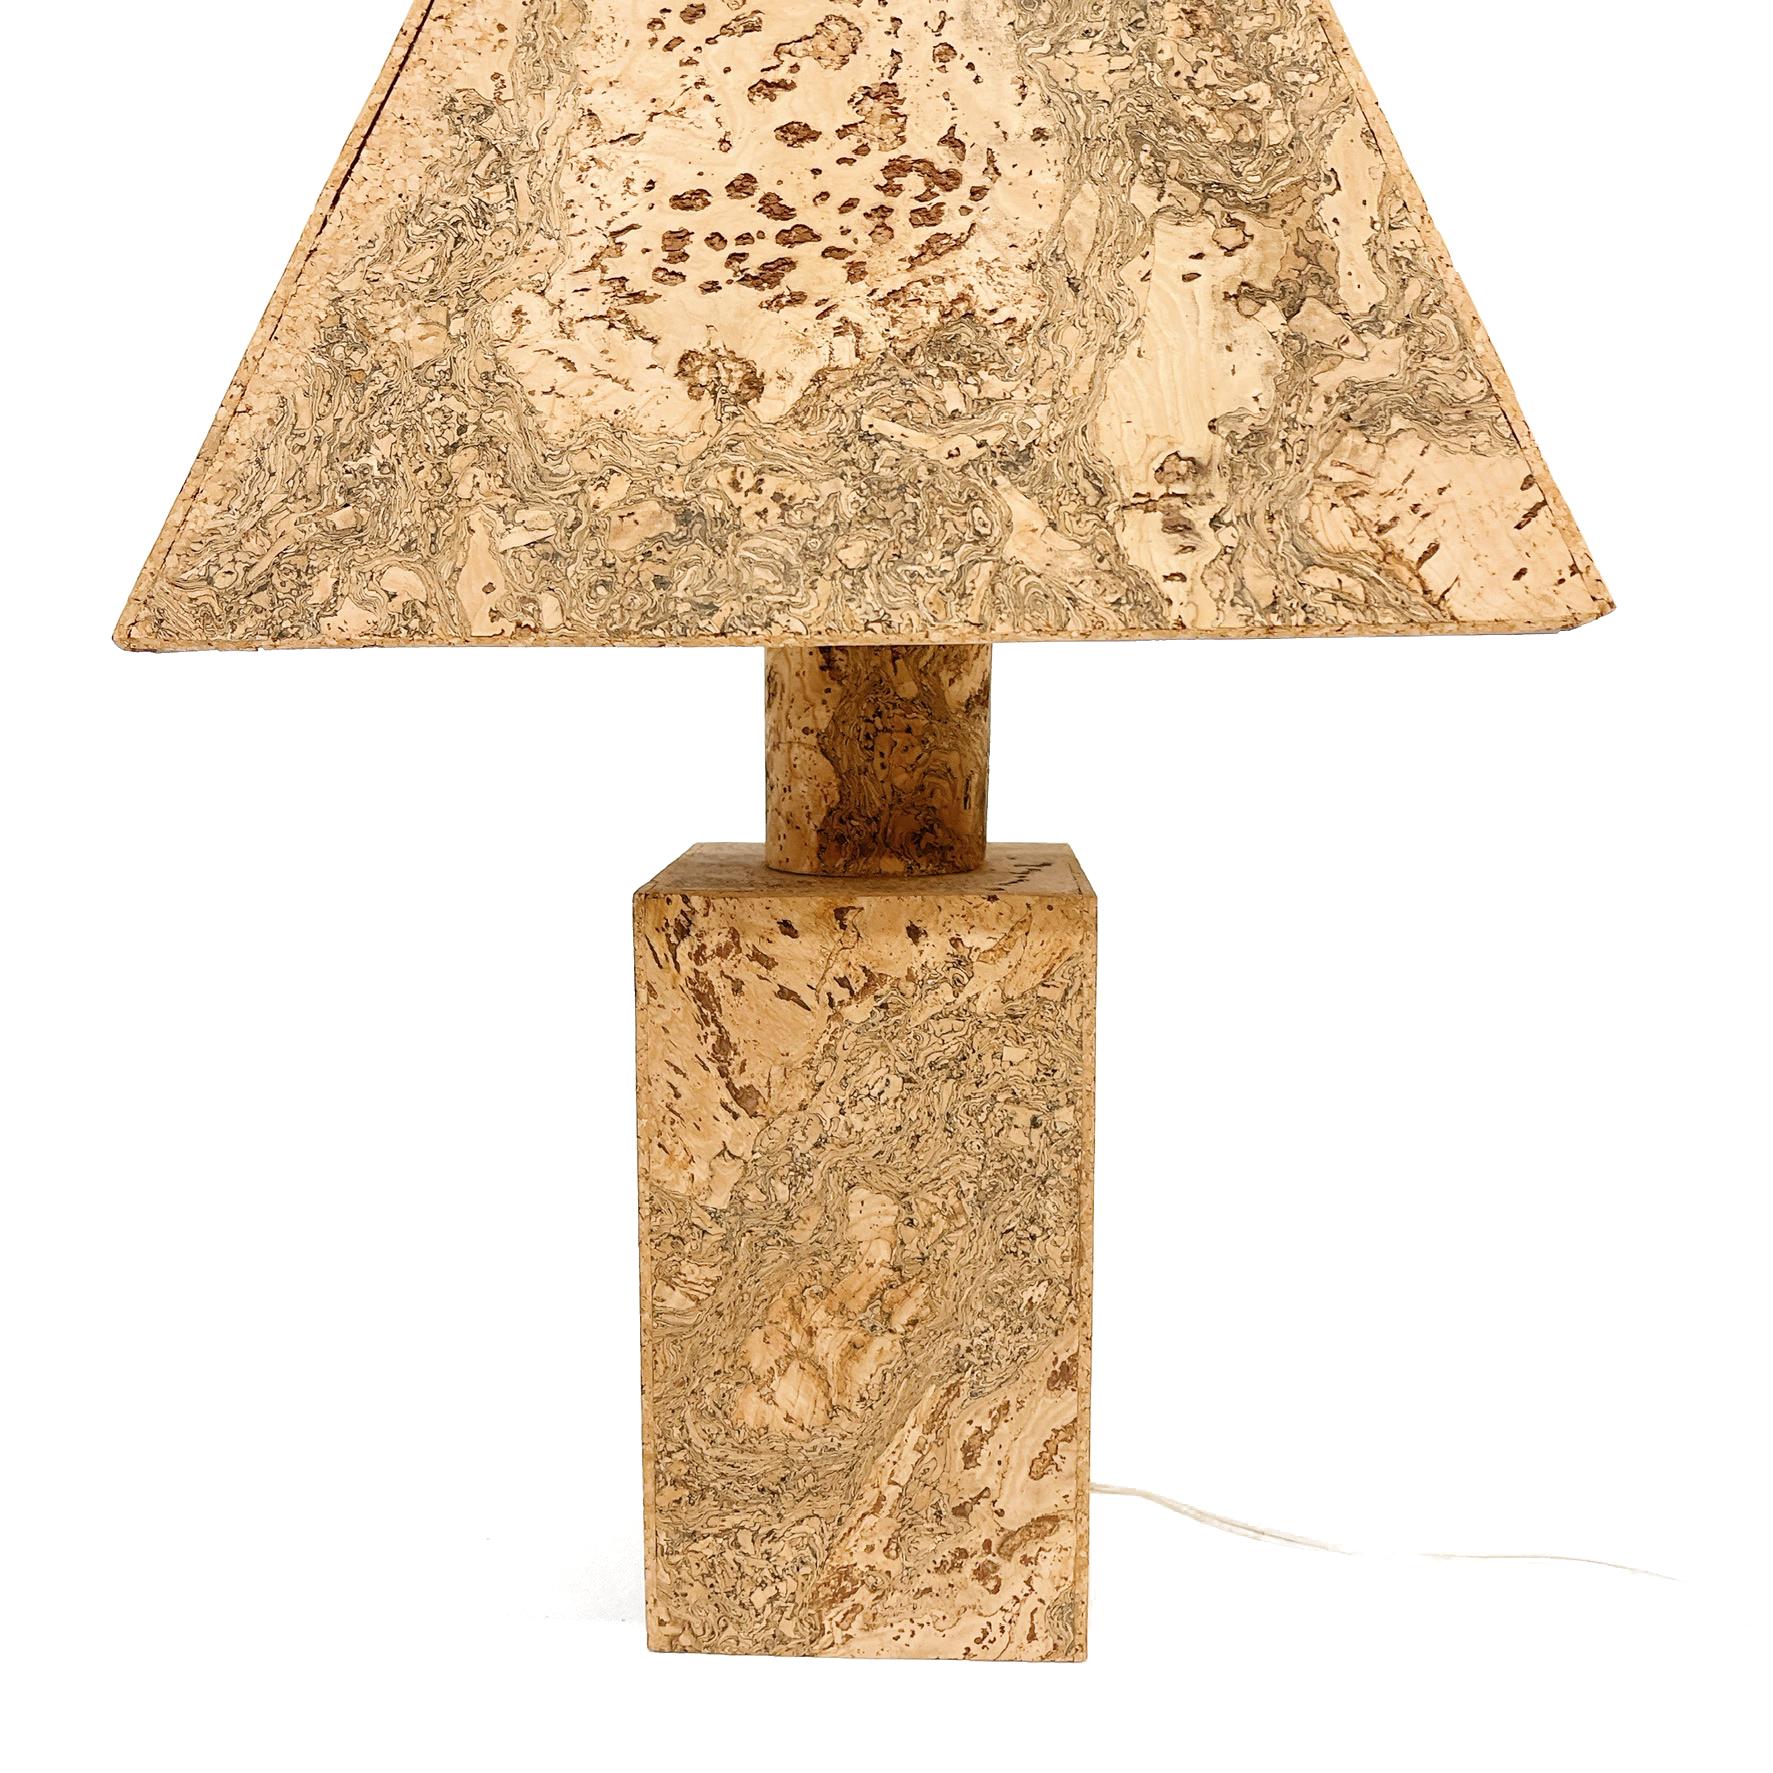 Italian German Cork Table Lamp in the Style of Ingo Maurer, 1960s For Sale